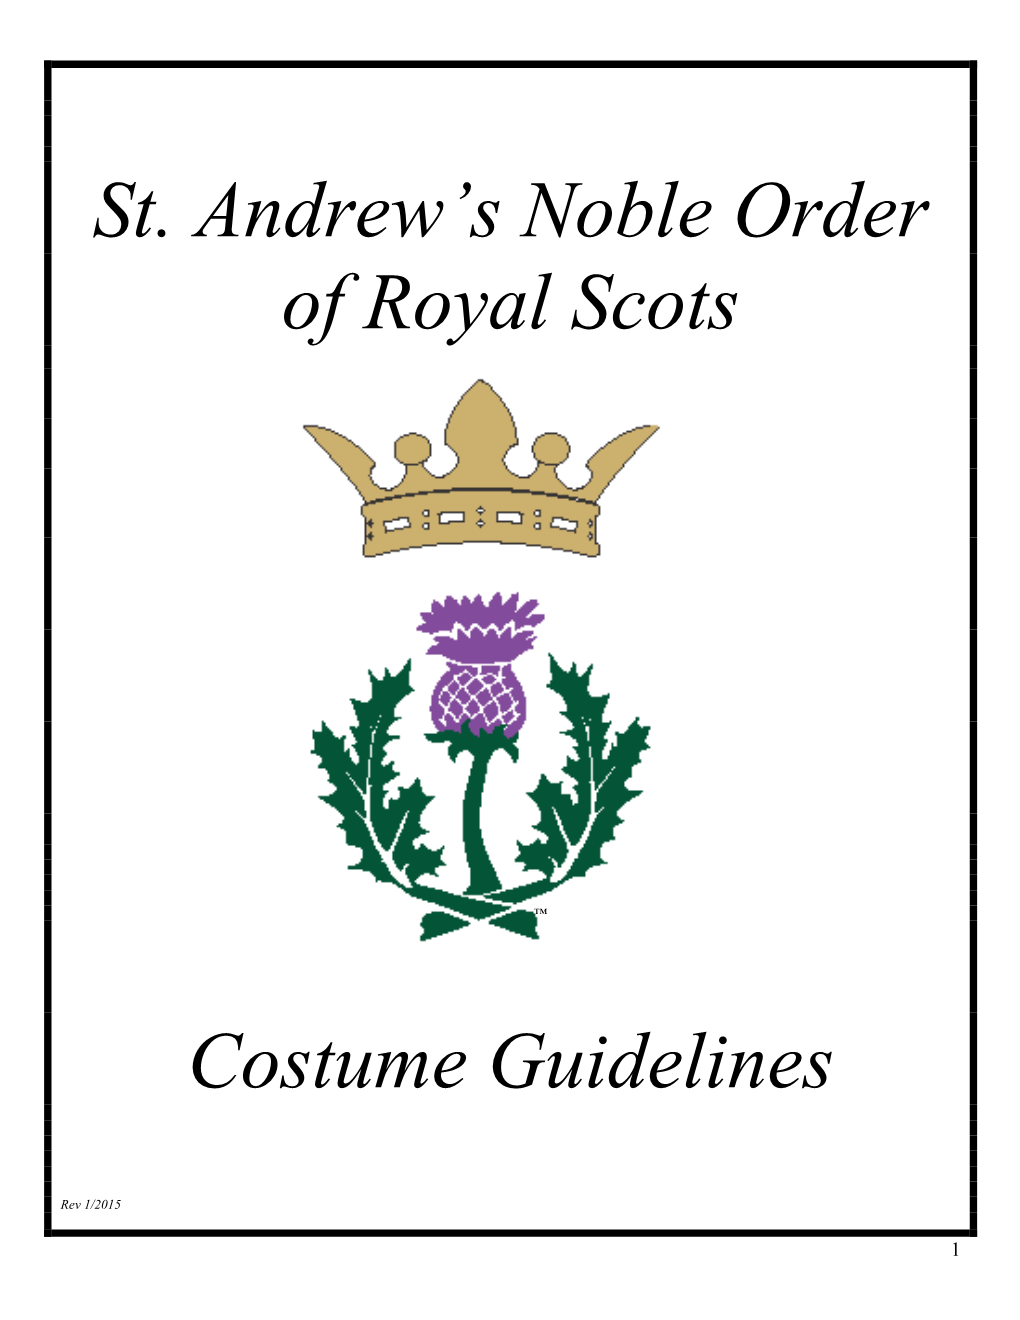 St. Andrew's Noble Order of Royal Scots Costume Guidelines